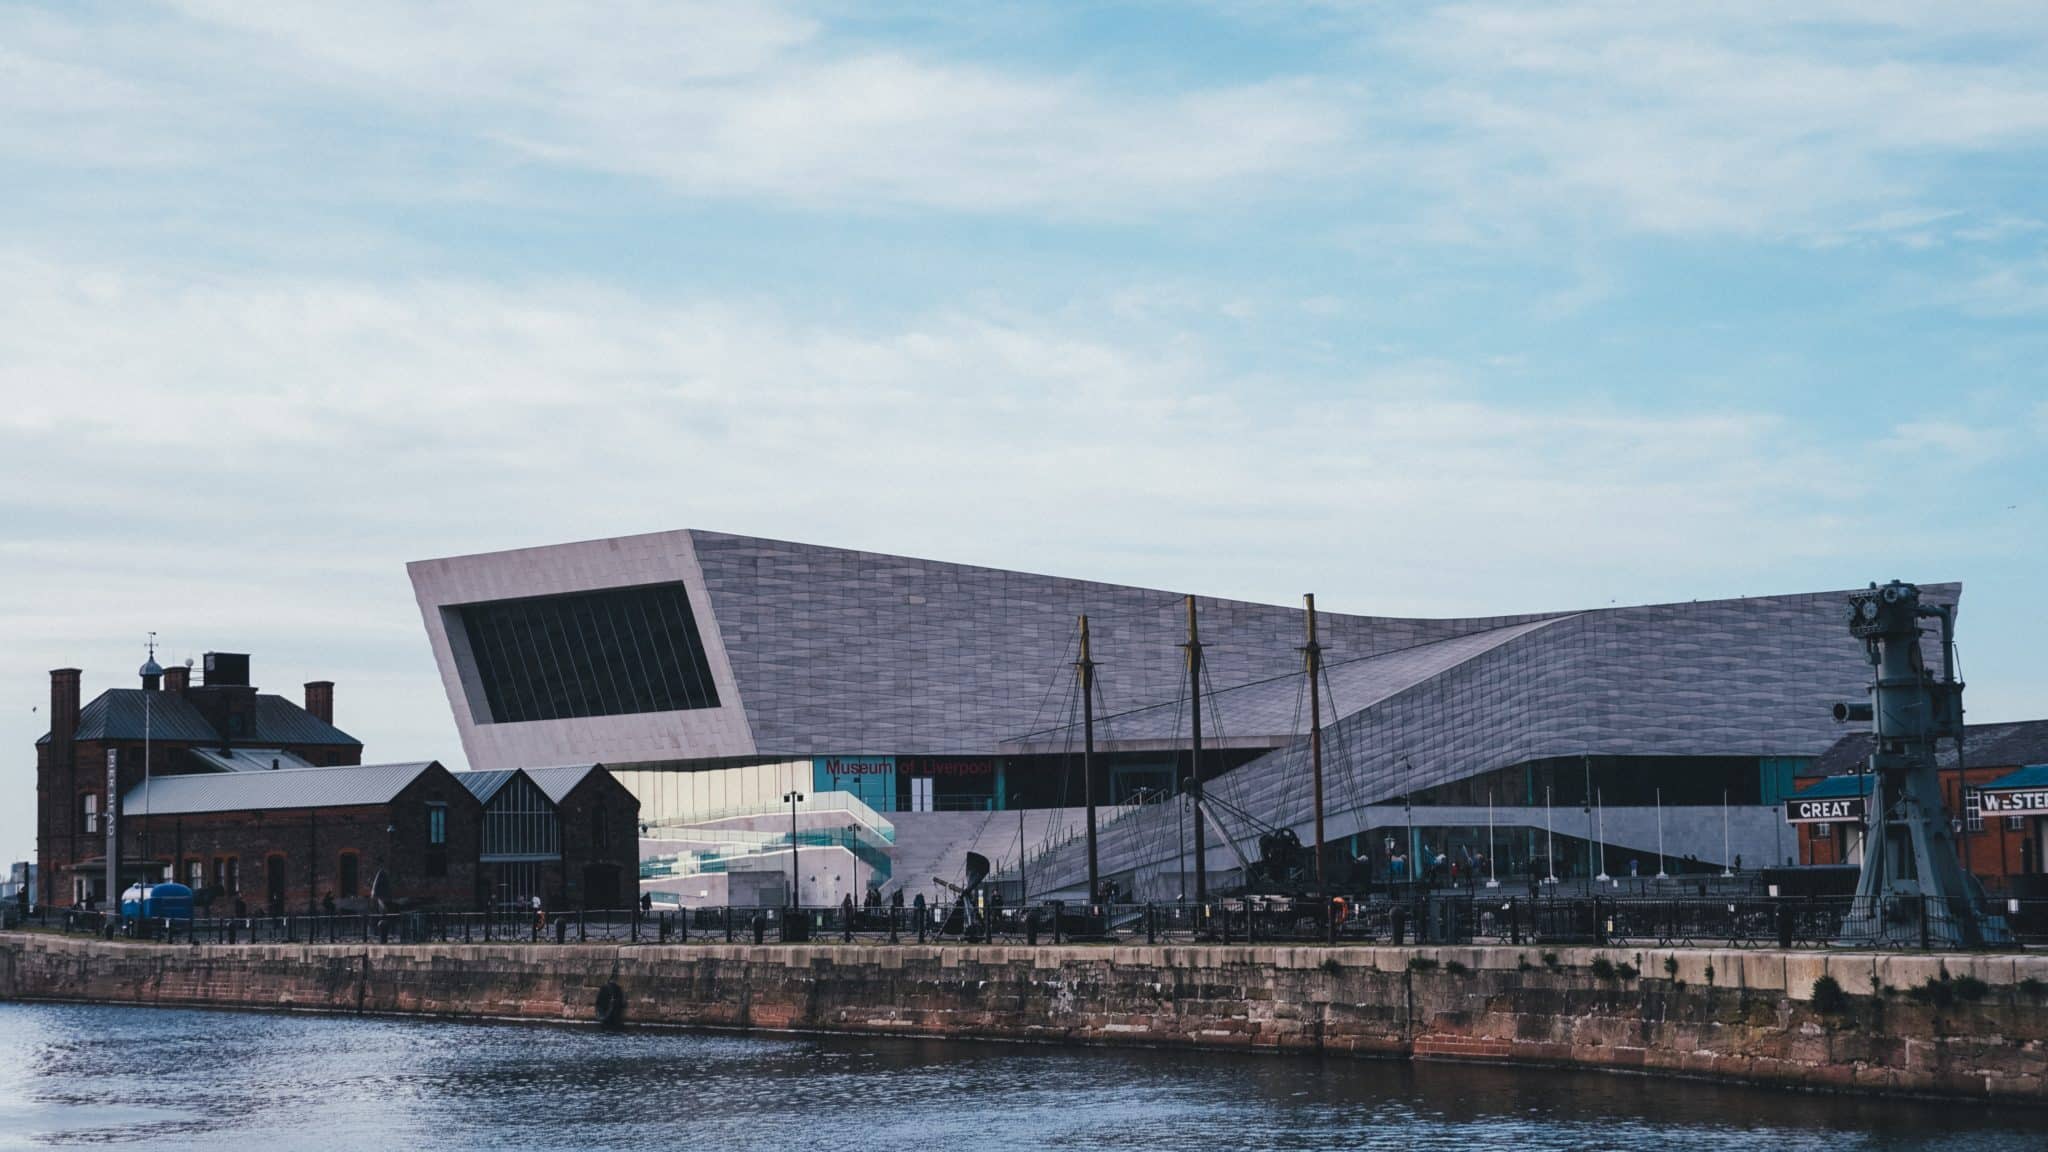 An image of The Museum of Liverpool taken from a distance showing the waterfront and a clear sky.